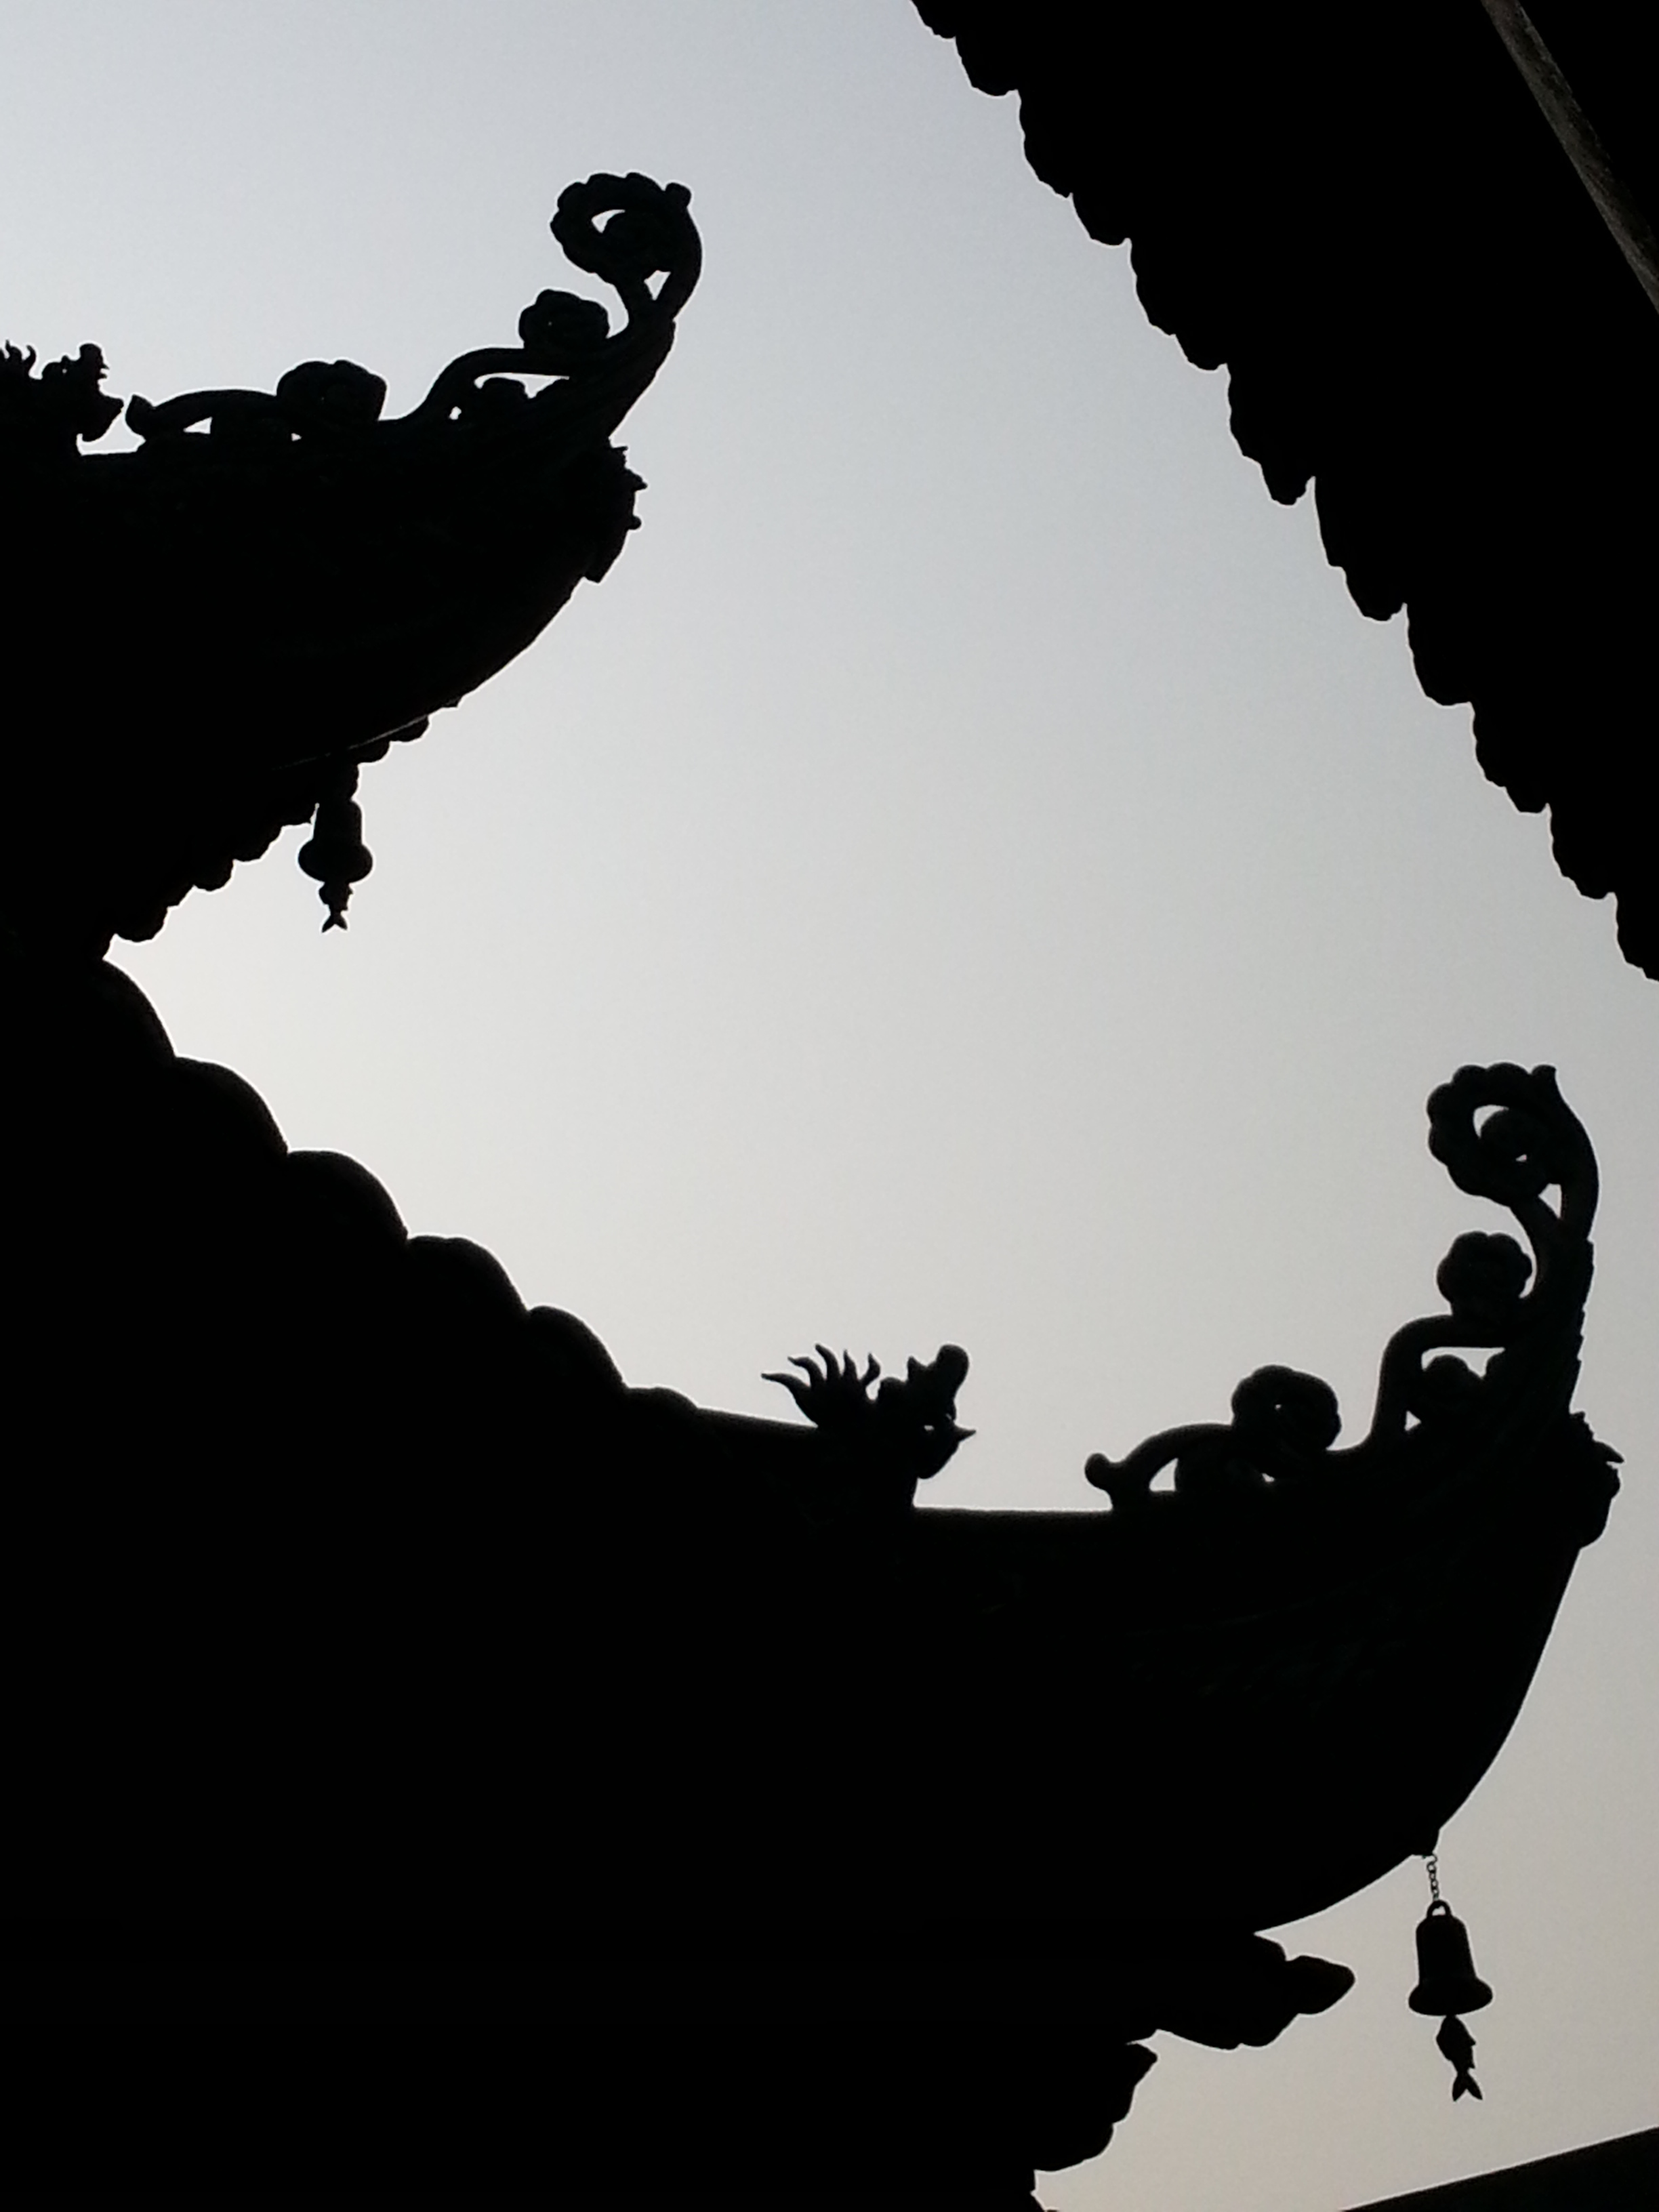 Roof Silhouette | Sojourn in China